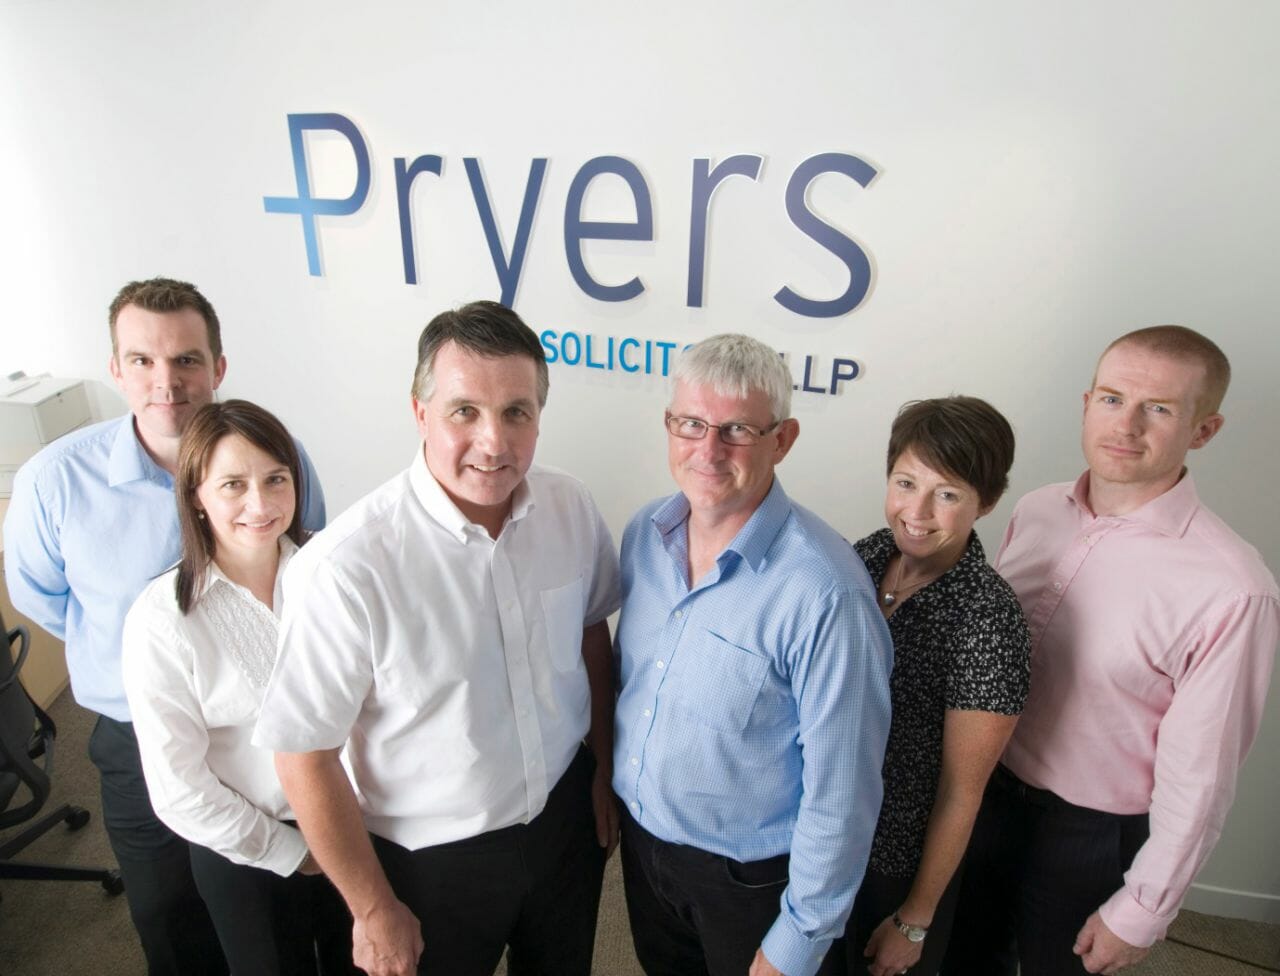 A photograph of the new partners at Pryers Solicitors, with Ian Pryer and Time Gorman